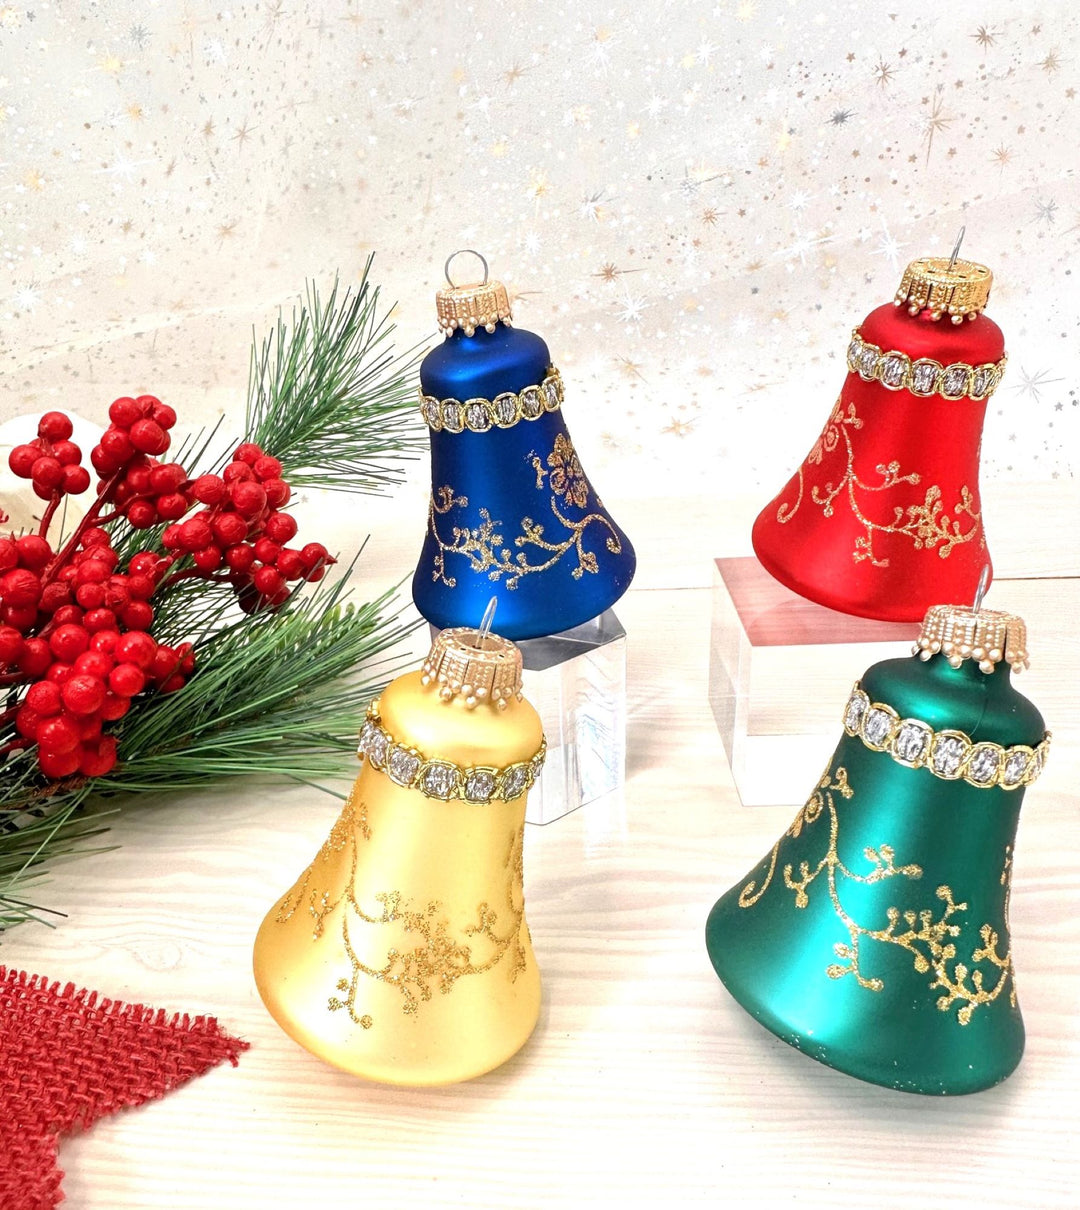 Glass Christmas Tree Ornaments - 67mm/2.625" [4 Pieces] Decorated Balls from Christmas by Krebs Seamless Hanging Holiday Decor (Red, Gold, Navy & Green 3" Bell w/ Glitterlace & Braid)